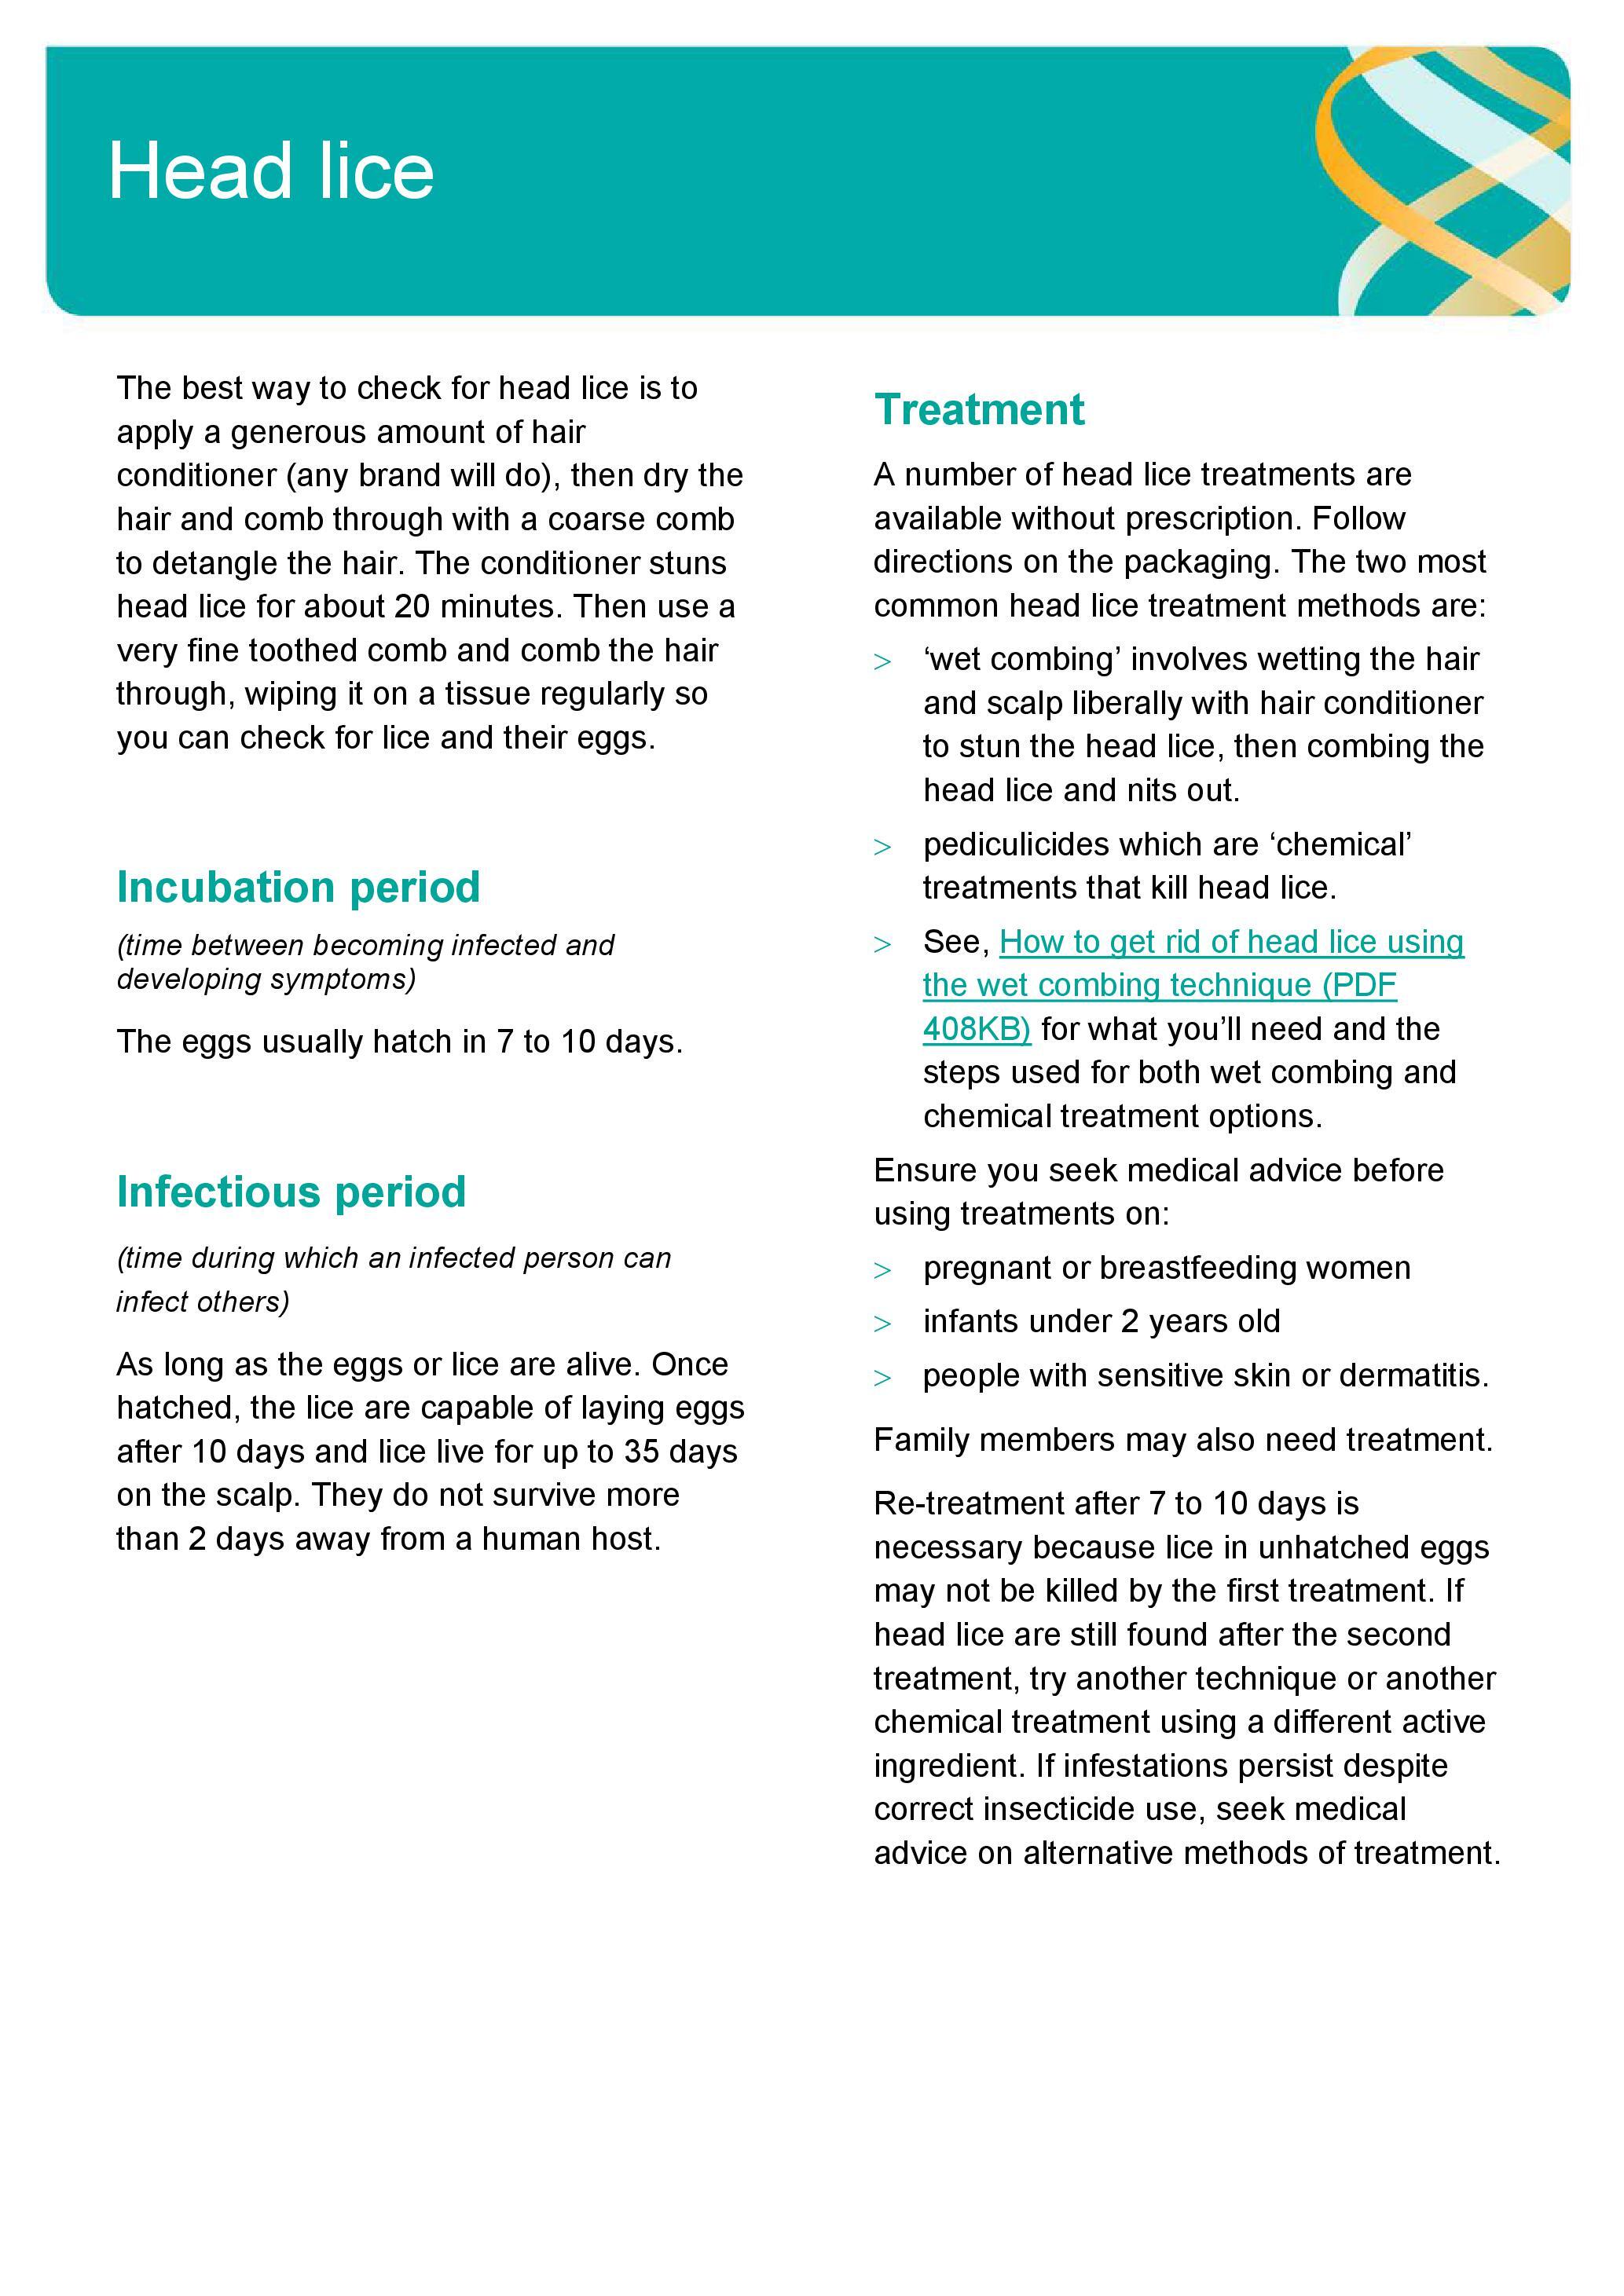 Head Lice Information (1)_Page_2